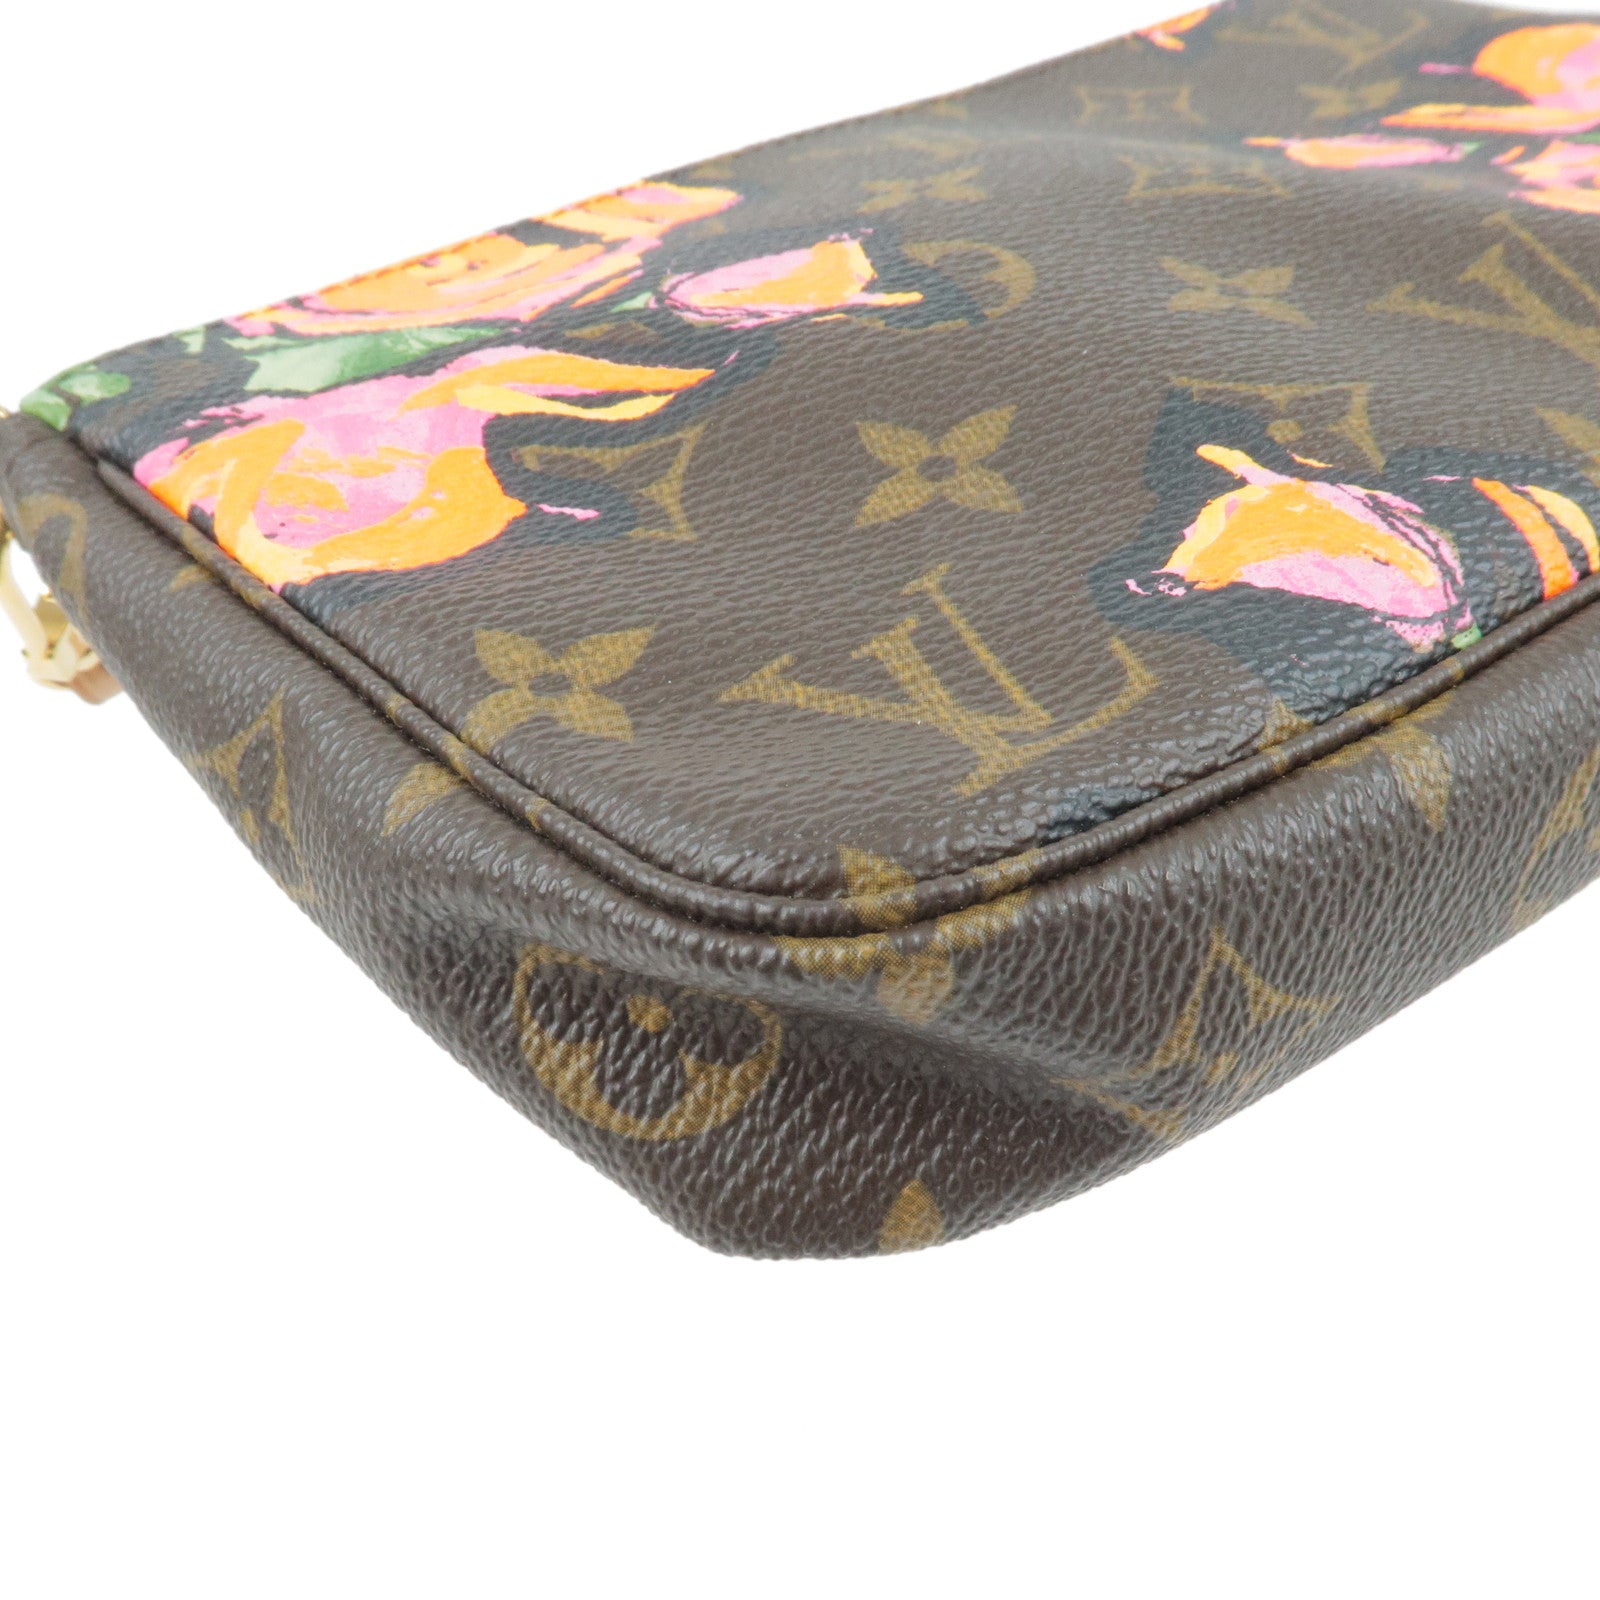 2010 pre-owned Pochette Cles coin pouch